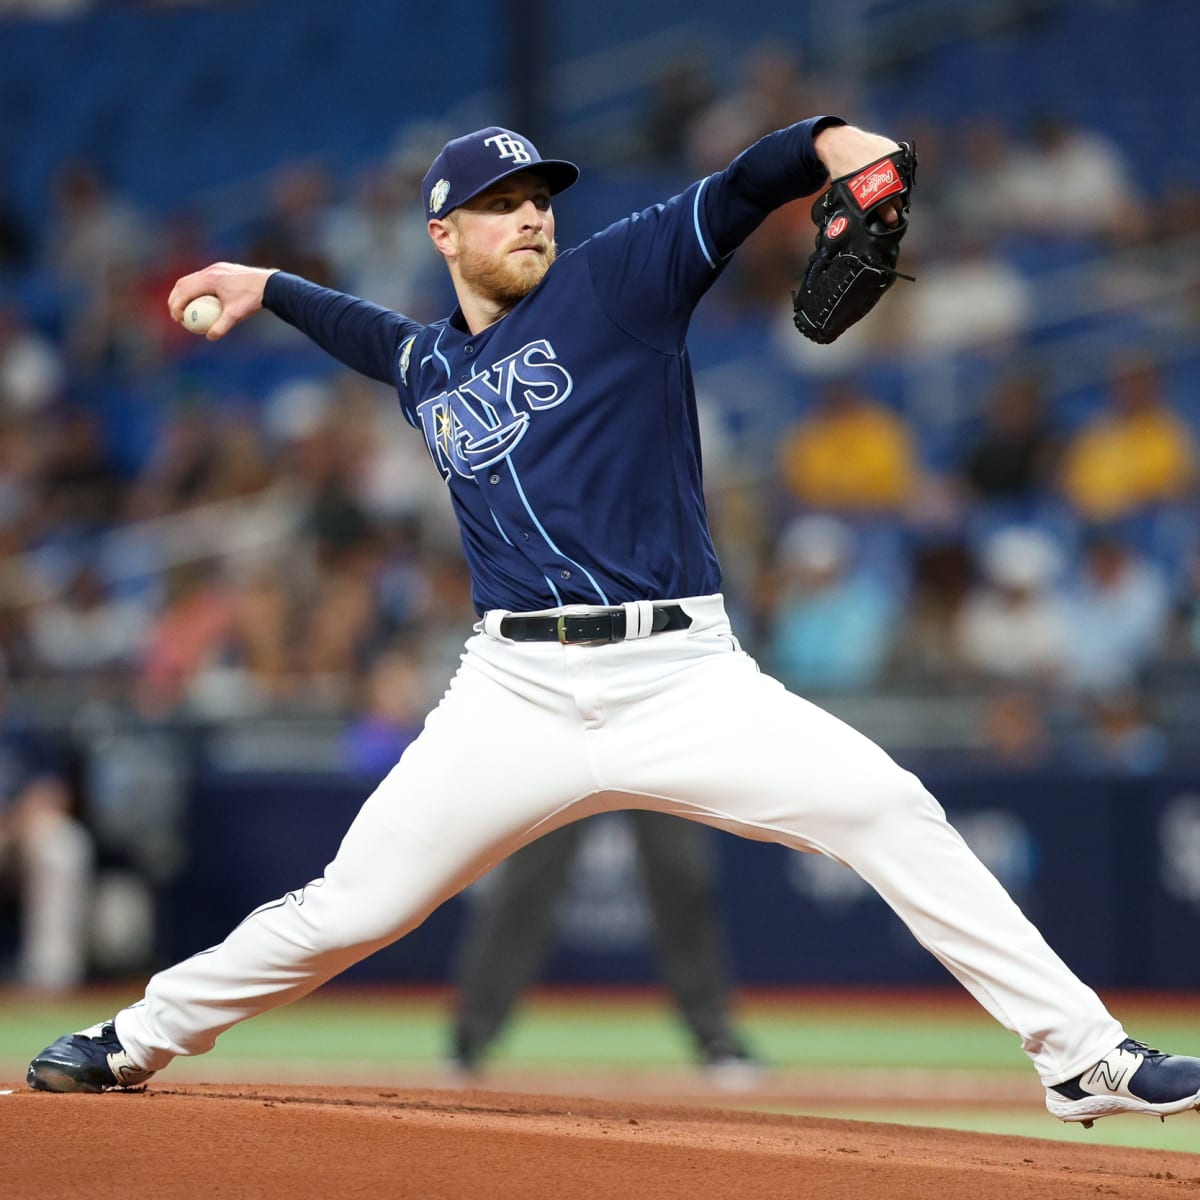 Tampa Bay Rays Pitcher Joins Sandy Koufax in Exclusive Club in